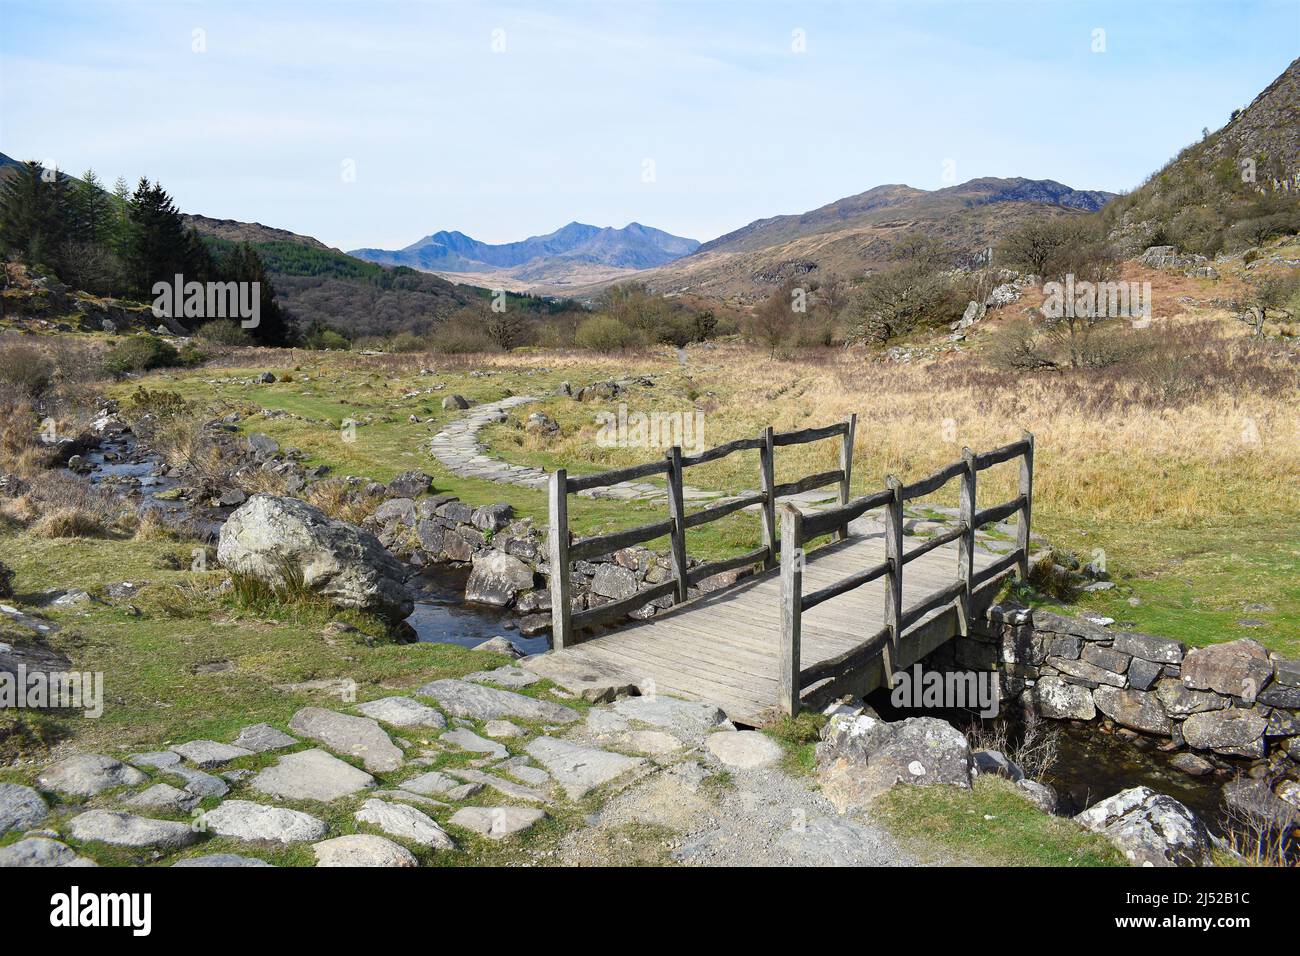 View of a public footpath bridge crossing a stream in Snowdonia, Wales, UK. In the background the mountain range including Mt Snowdon and Y Lliwedd. Stock Photo